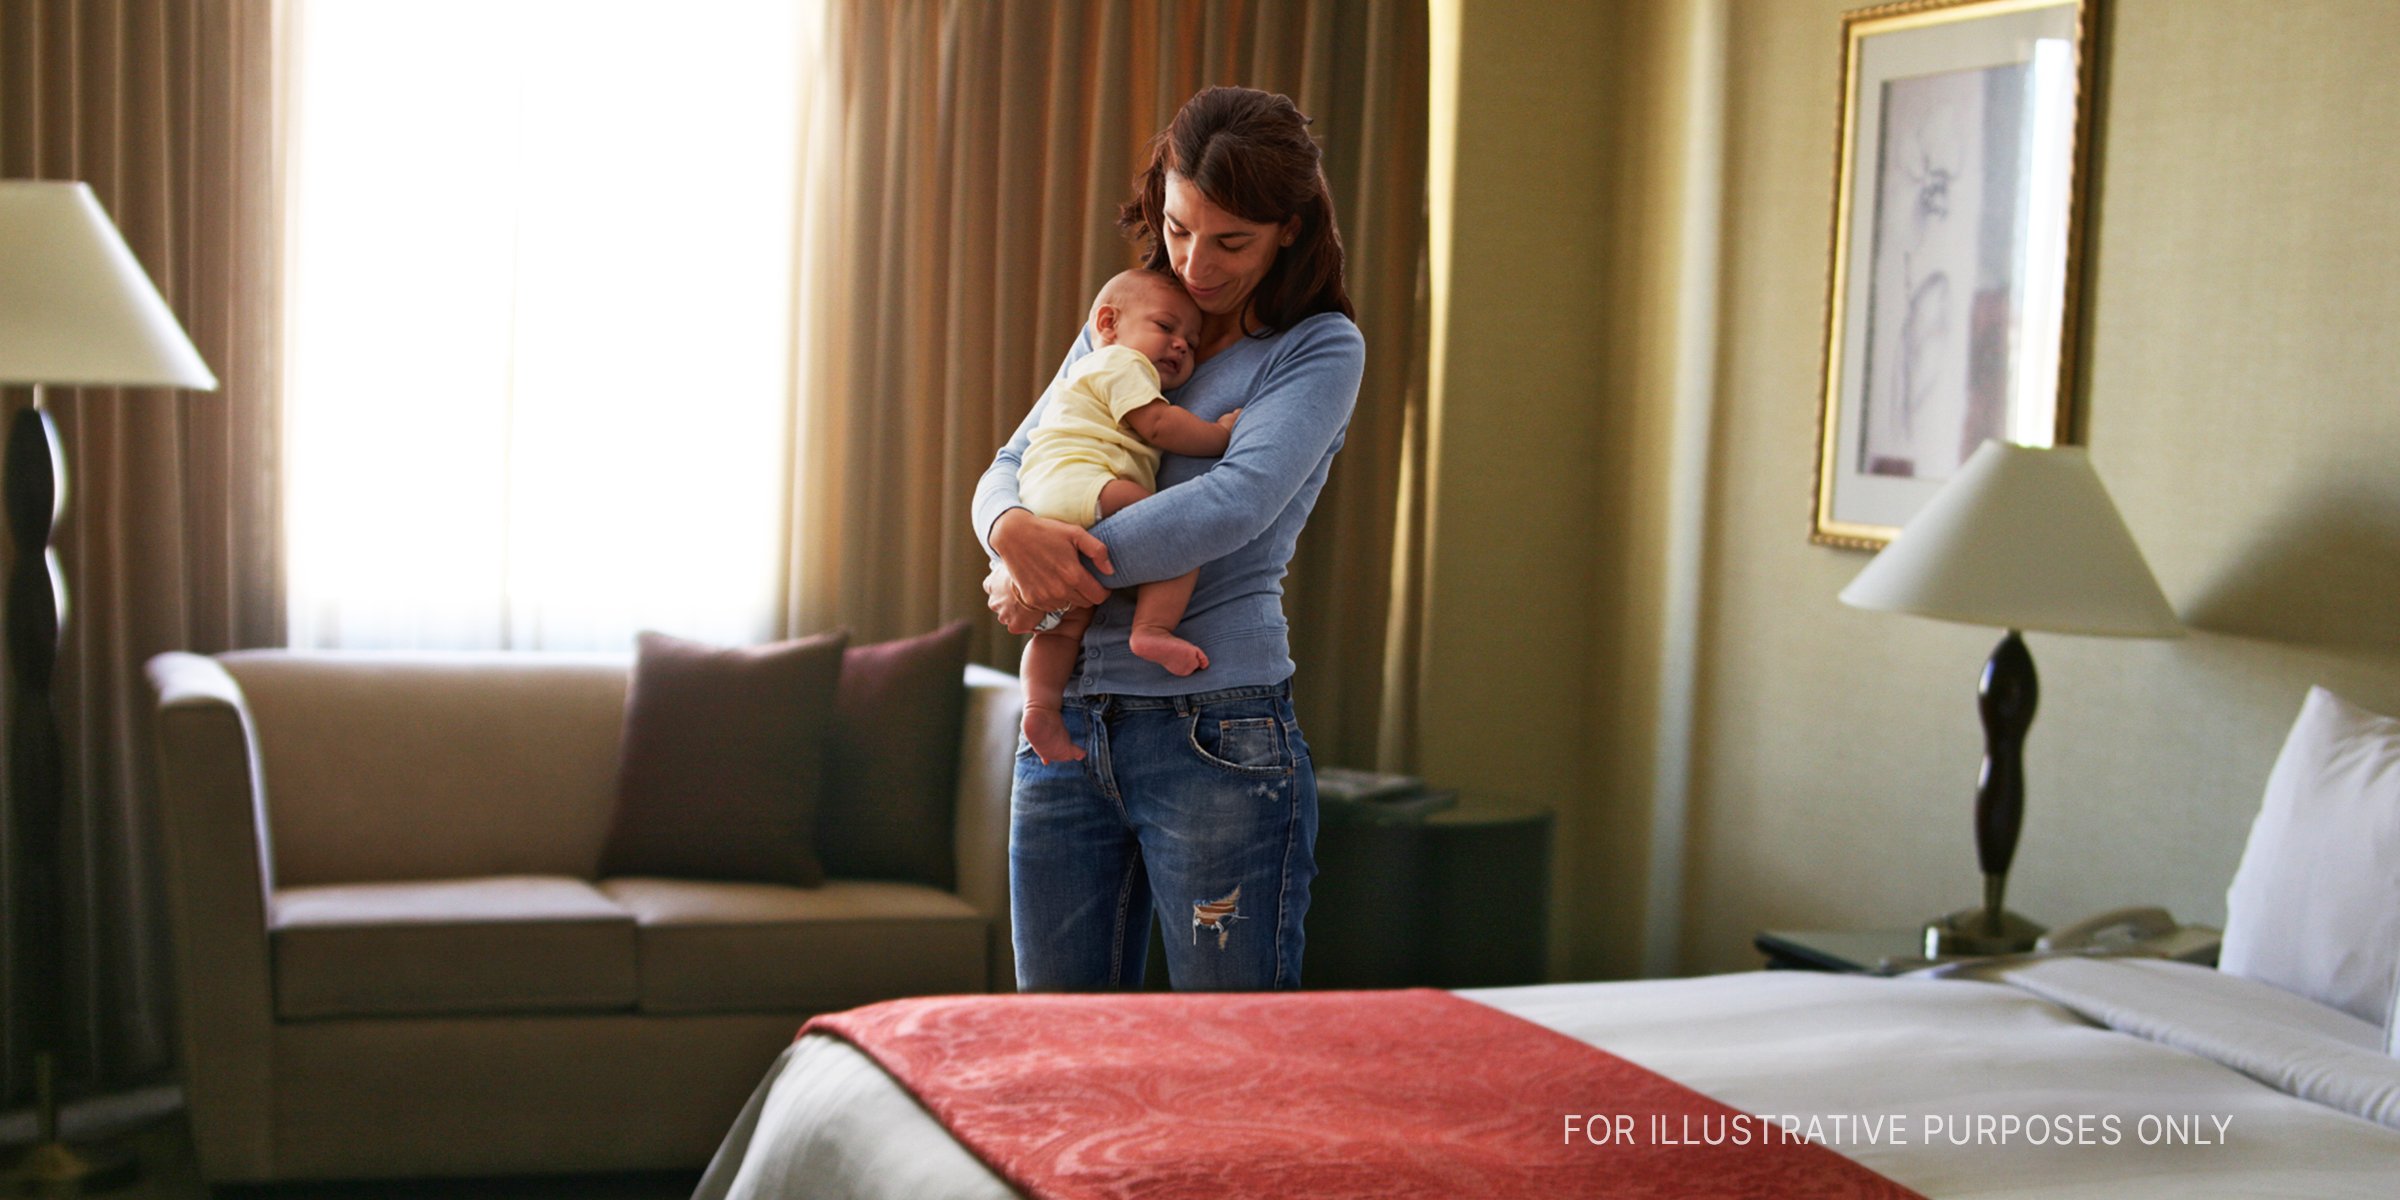 Flickr / quinn.anya (CC BY-SA 2.0) Shutterstock | Woman in a bedroom holding a baby